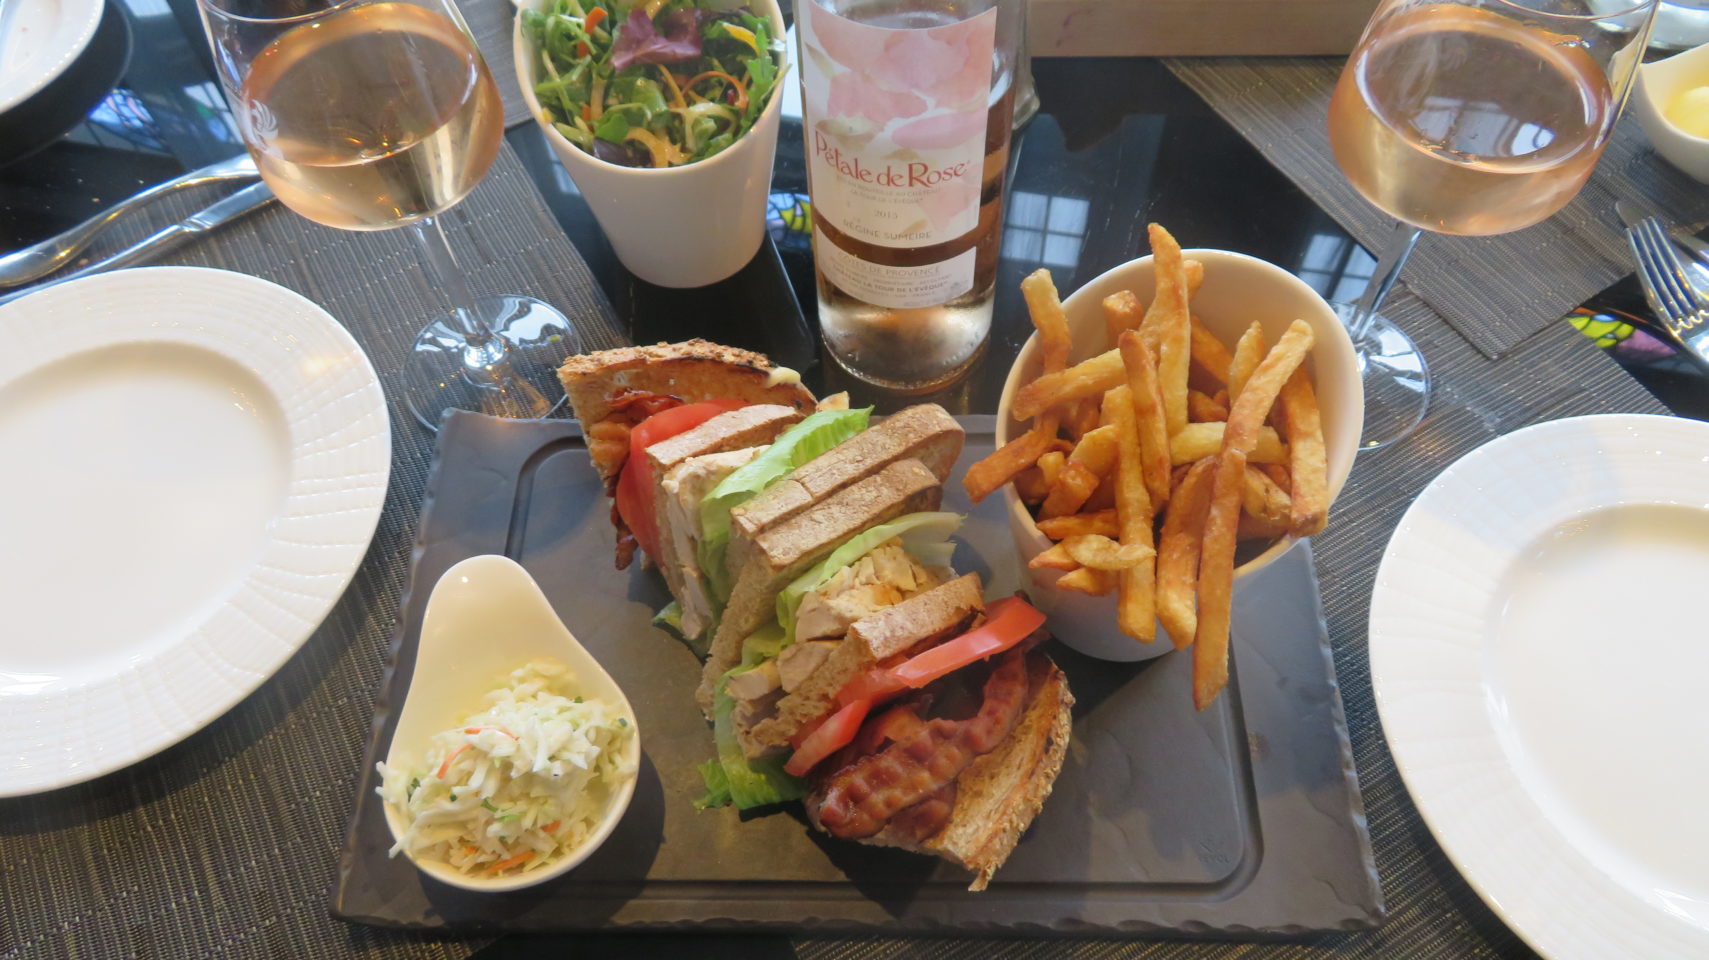 A quick lunch at the Bistro Le Sam of the Fairmont Le Chateau Frontenac